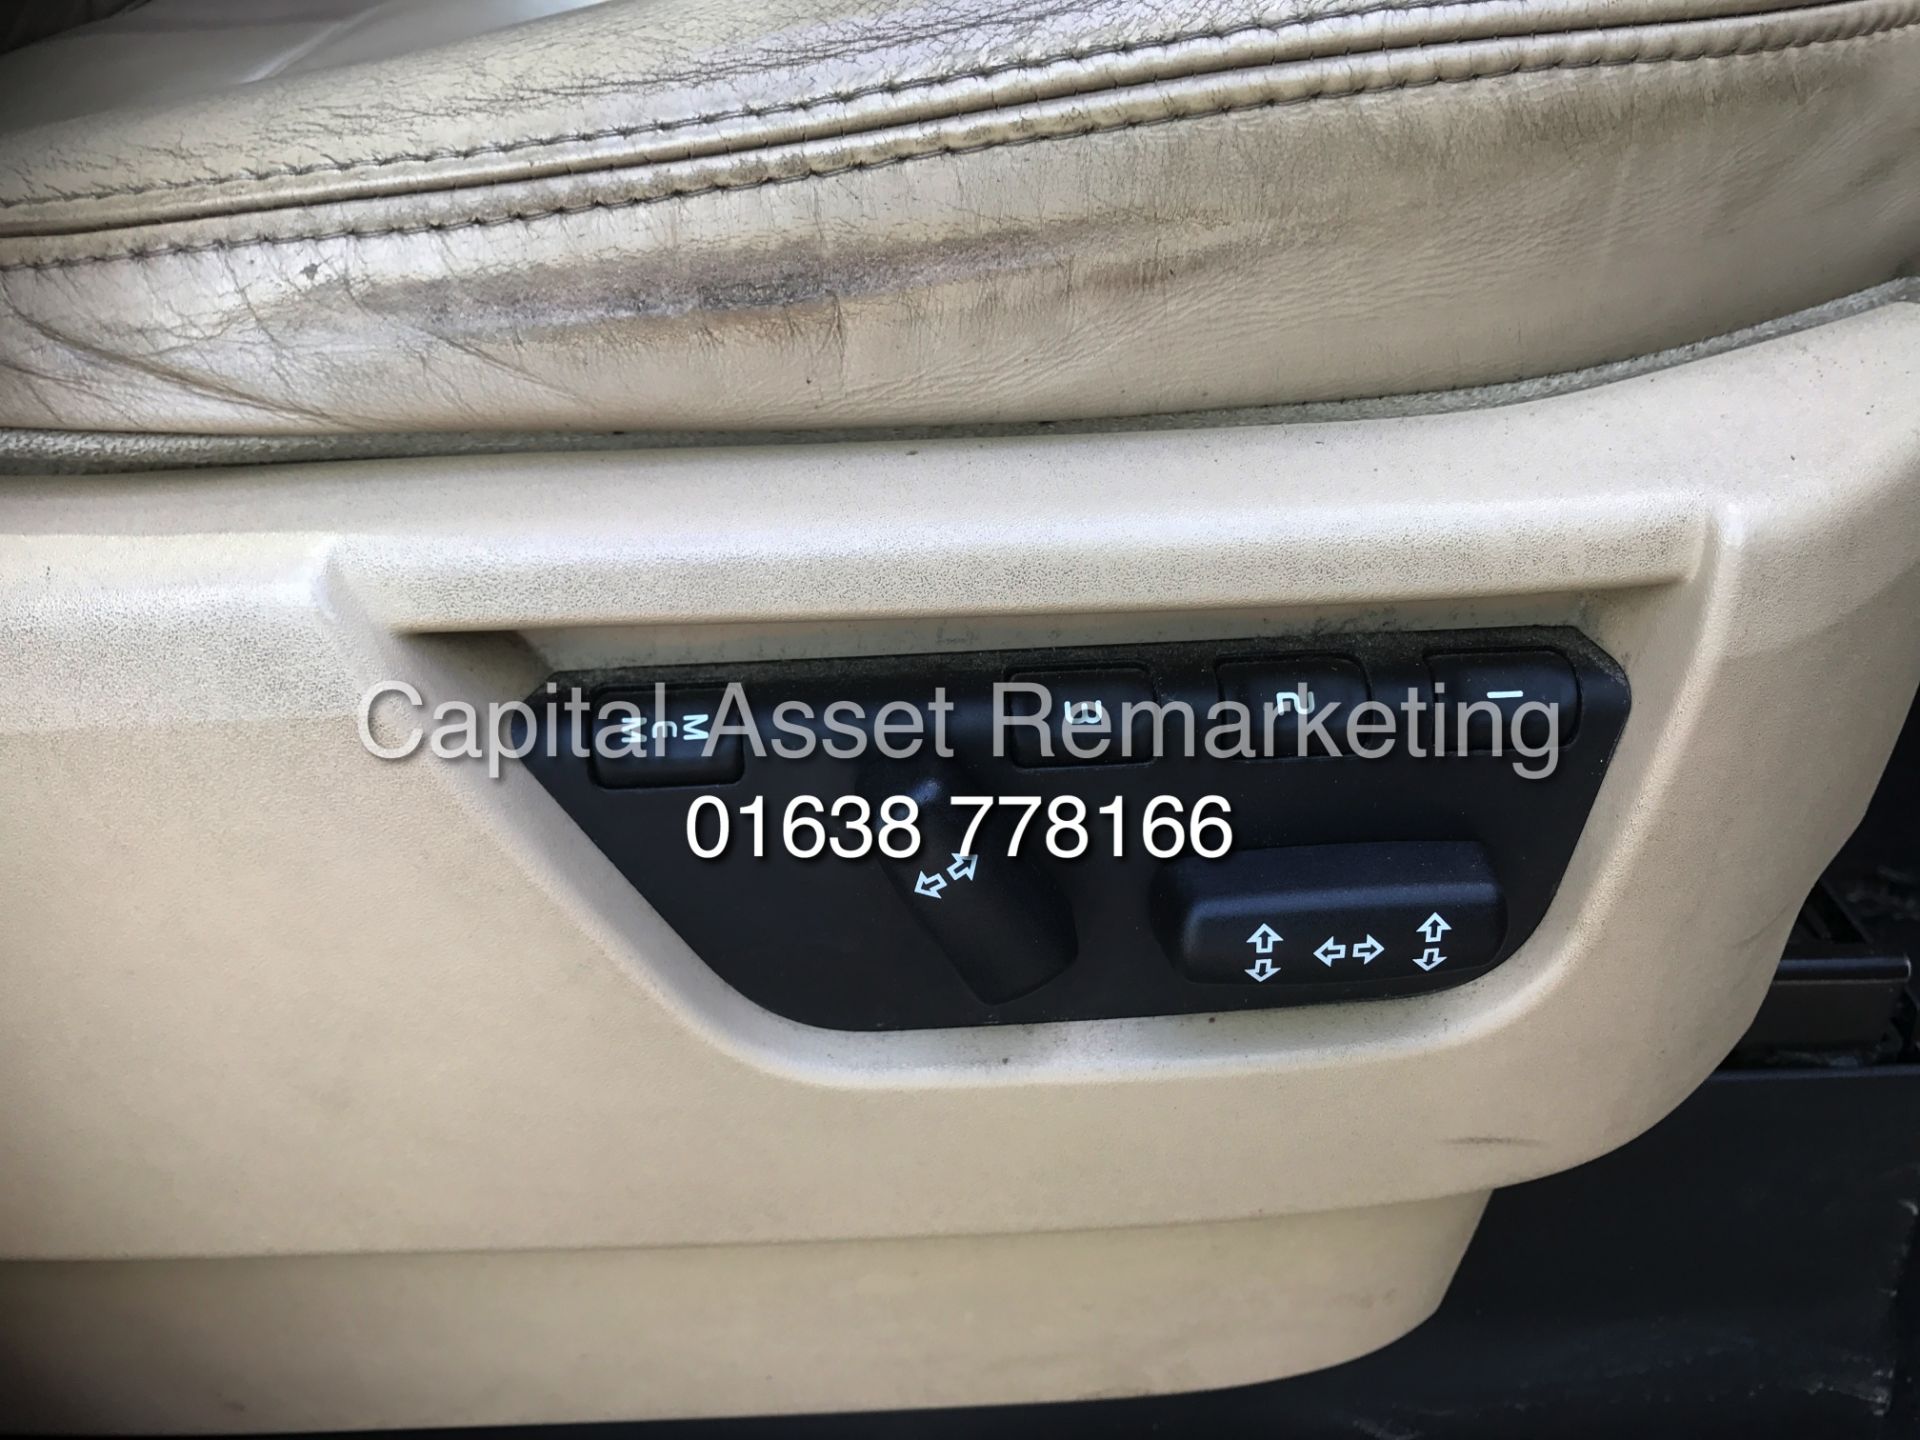 (ON SALE) LANDROVER DISCOVERY 3 "TDV6 "HSE" AUTOMATIC (08 REG) BLACK - FSH - LEATHER - SAT NAV - - Image 13 of 16